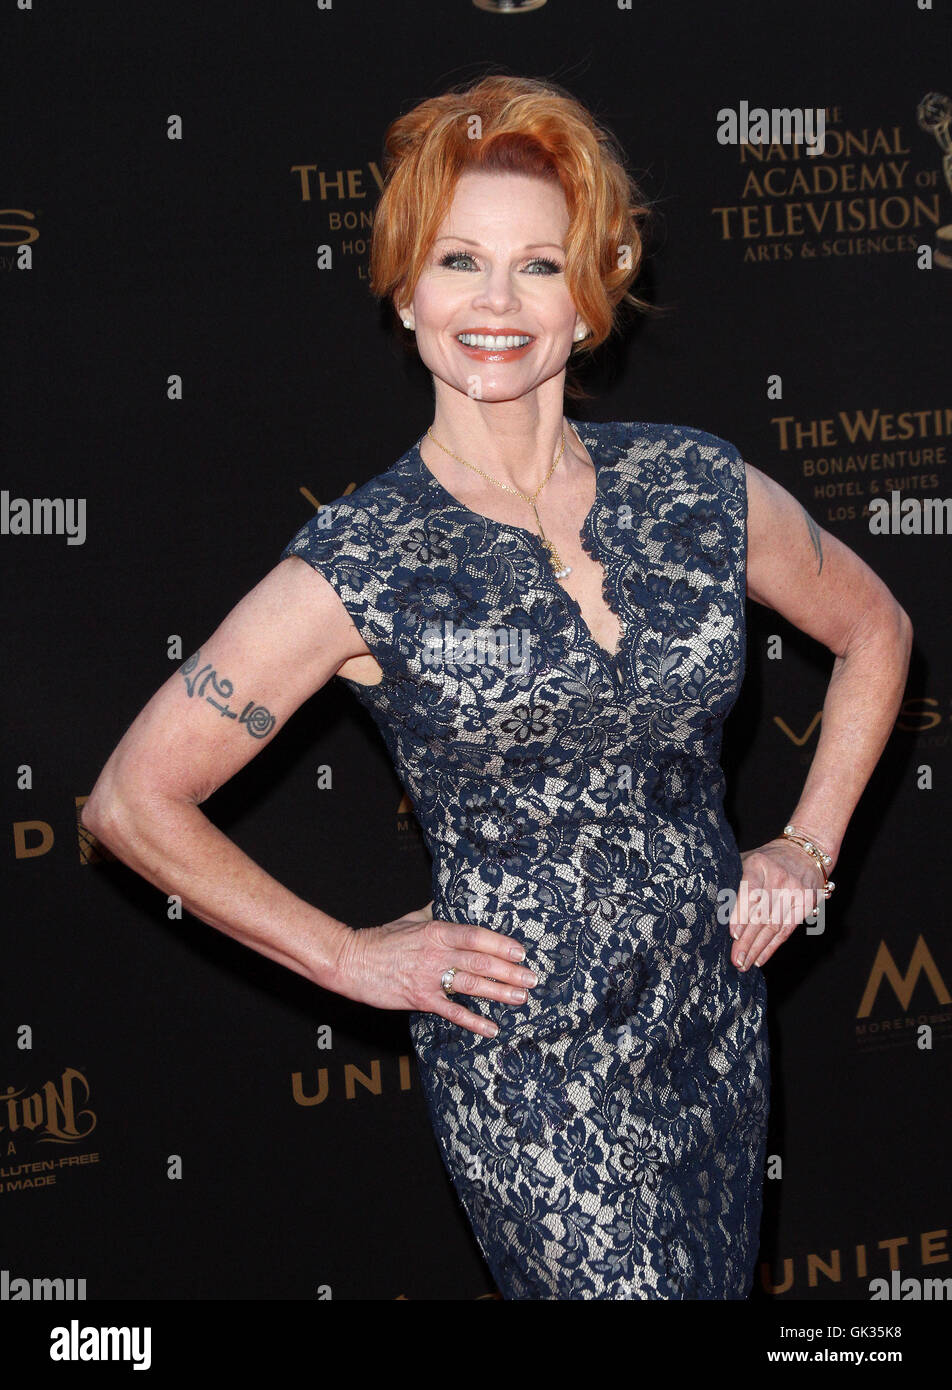 43rd Annual Daytime Creative Arts Emmy Awards 2016 at the Westin Bonaventure Hotel & Suites - Arrivals  Featuring: Patsy Pease Where: Los Angeles, California, United States When: 29 Apr 2016 Stock Photo